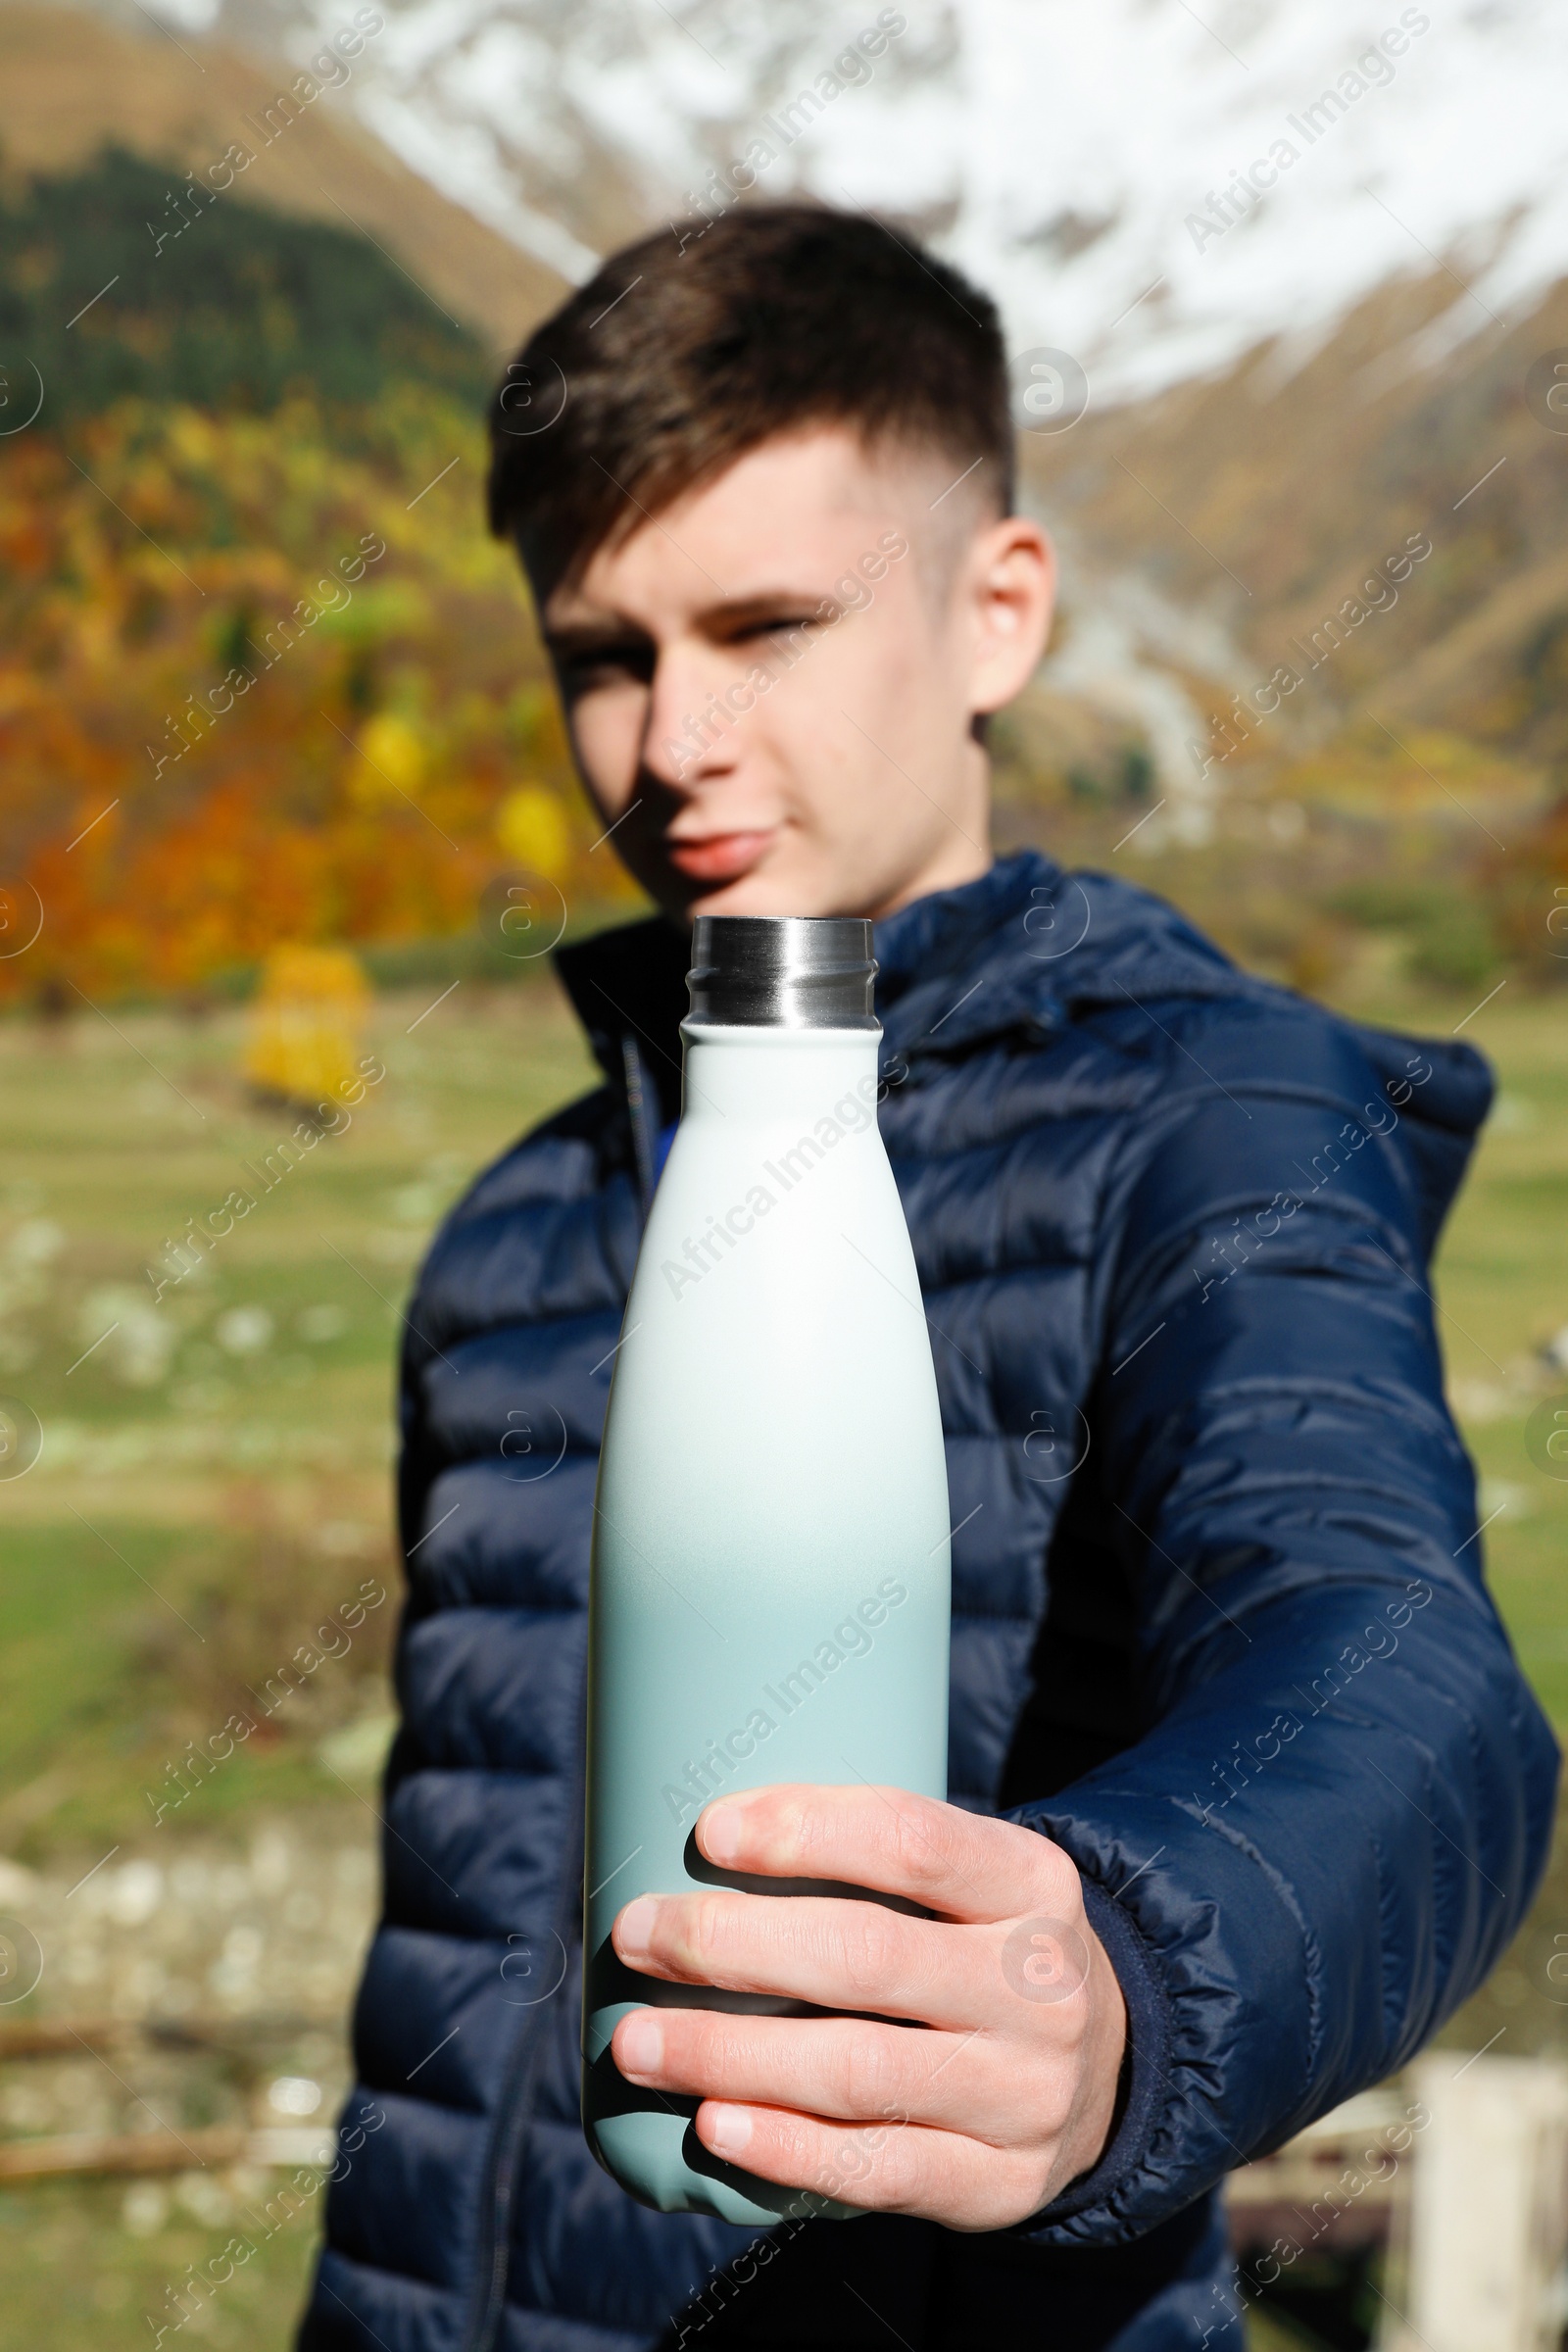 Photo of Boy holding thermo bottle with drink in mountains, focus on hand